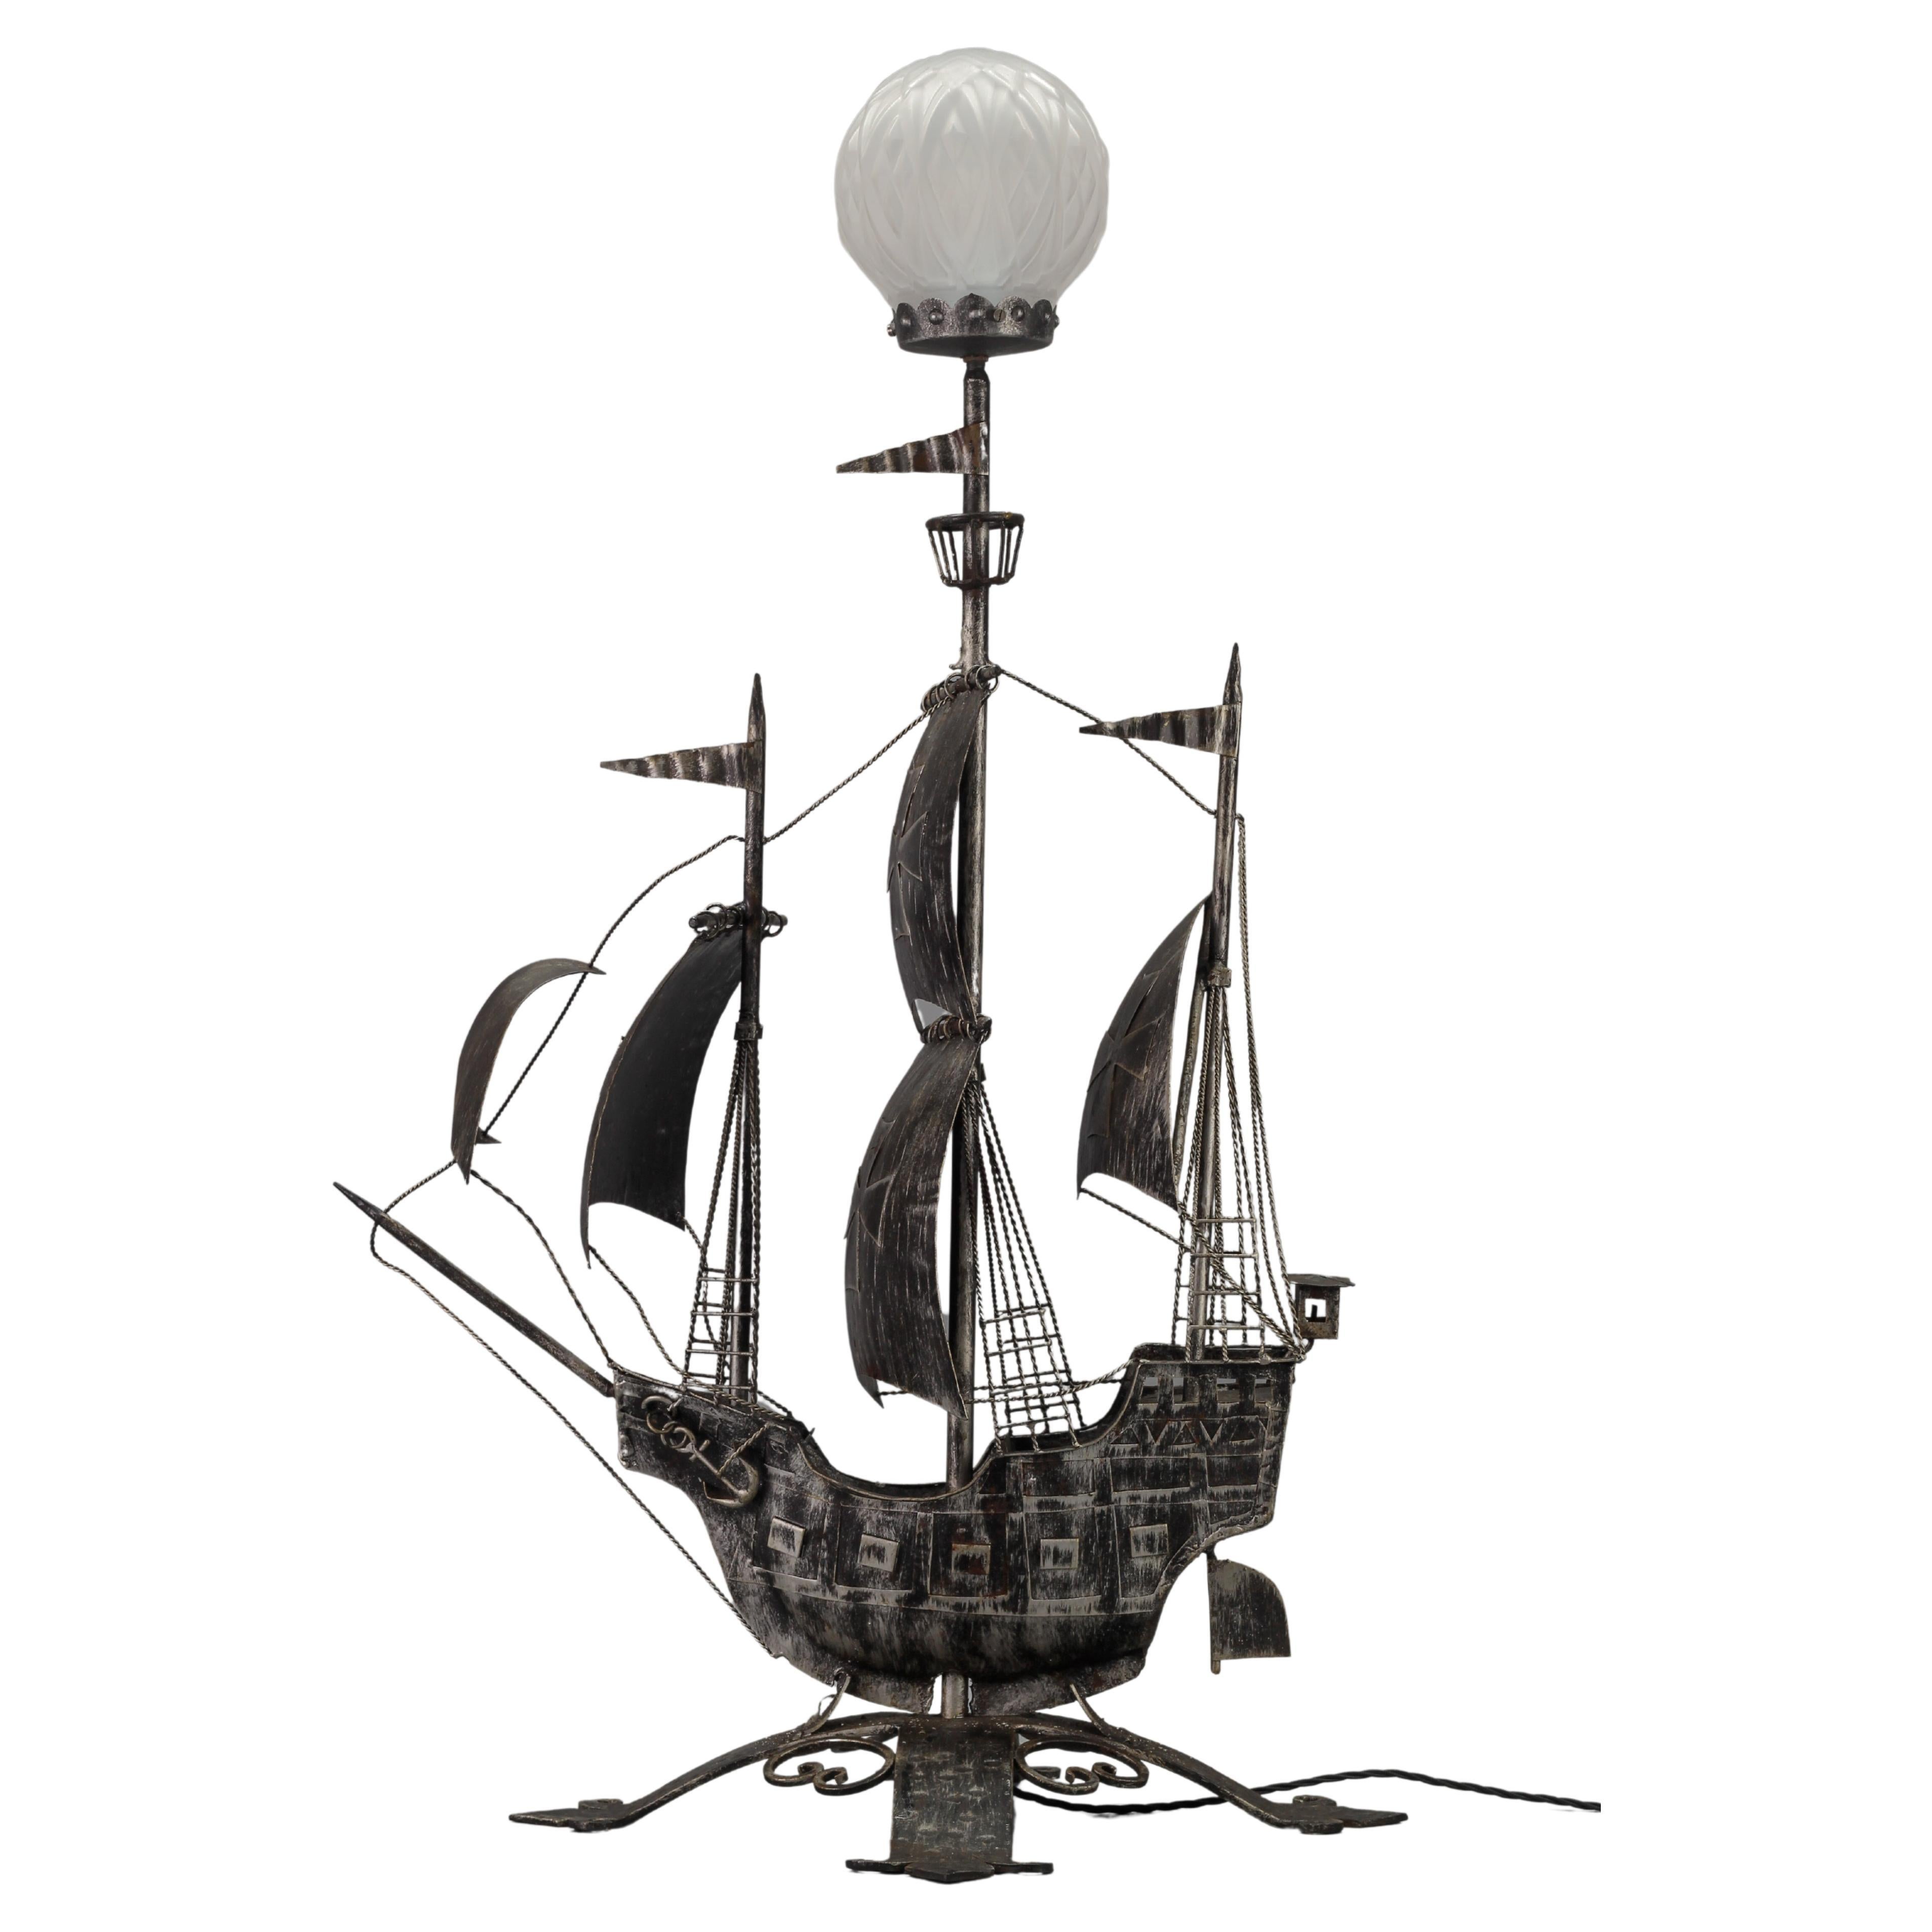 Wrought Iron and Glass Spanish Galleon Sailing Ship Shaped Floor Lamp, 1950s For Sale